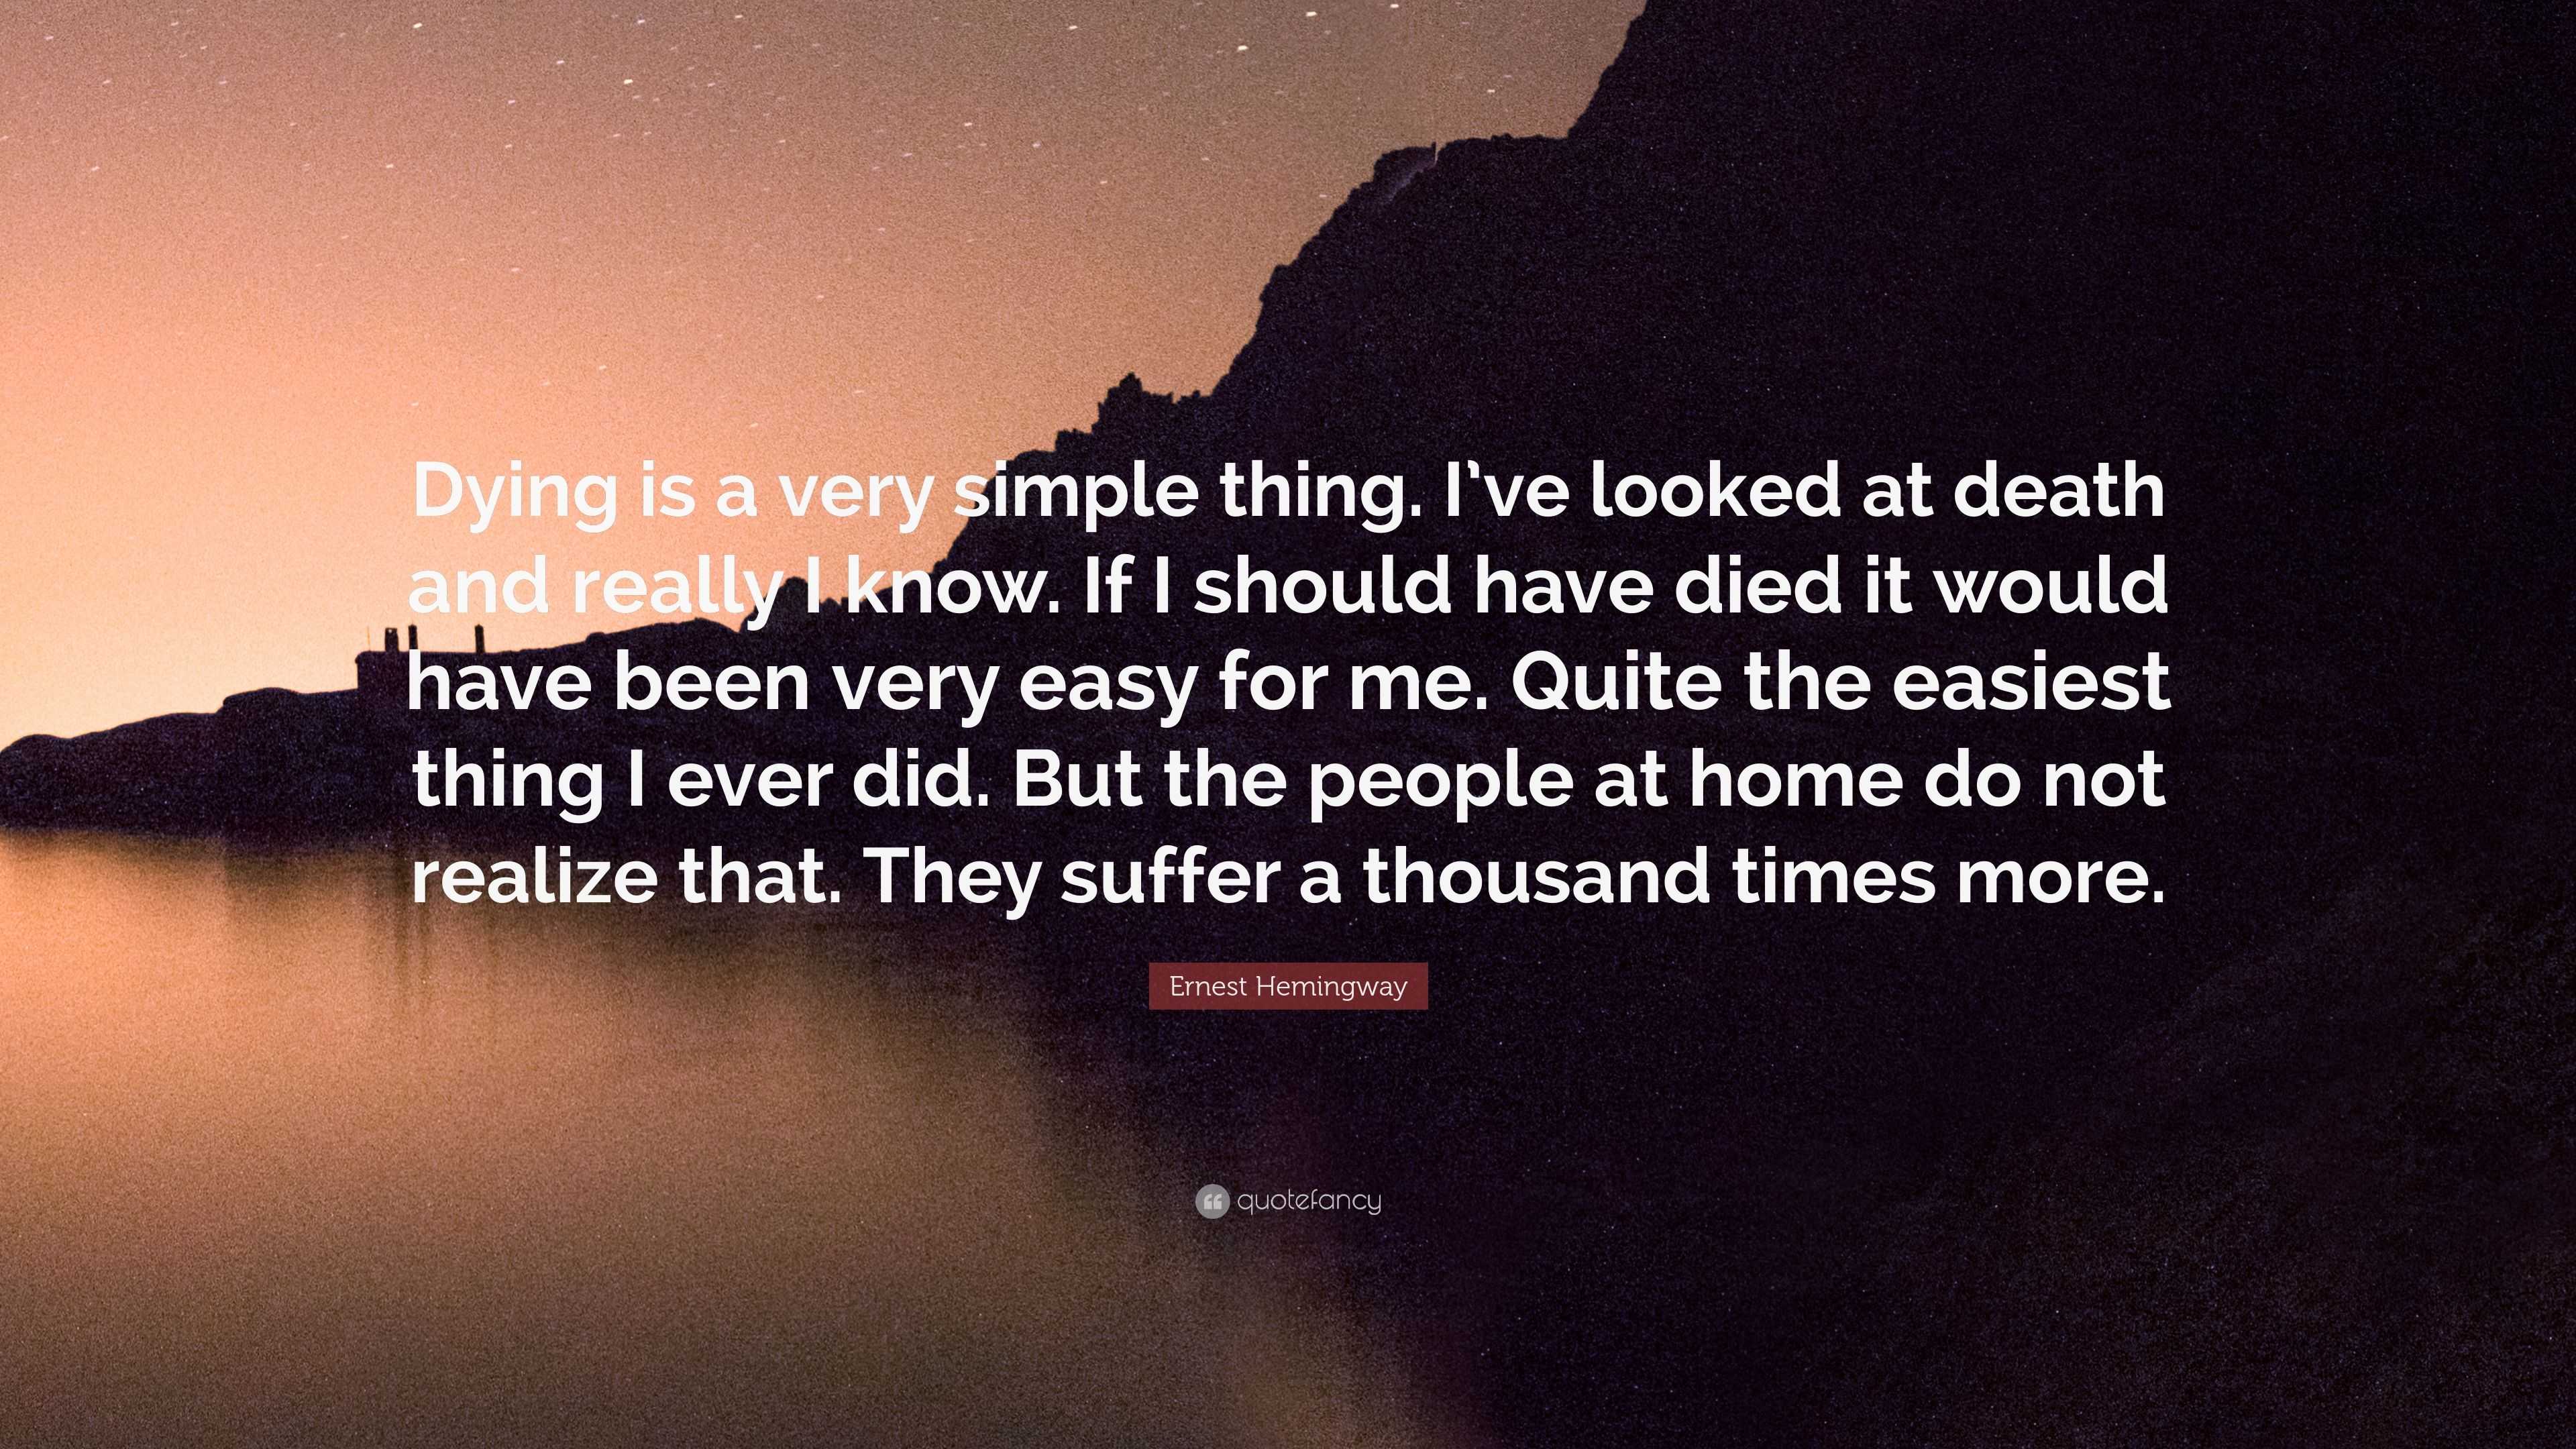 2496344 Ernest Hemingway Quote Dying is a very simple thing I ve looked at